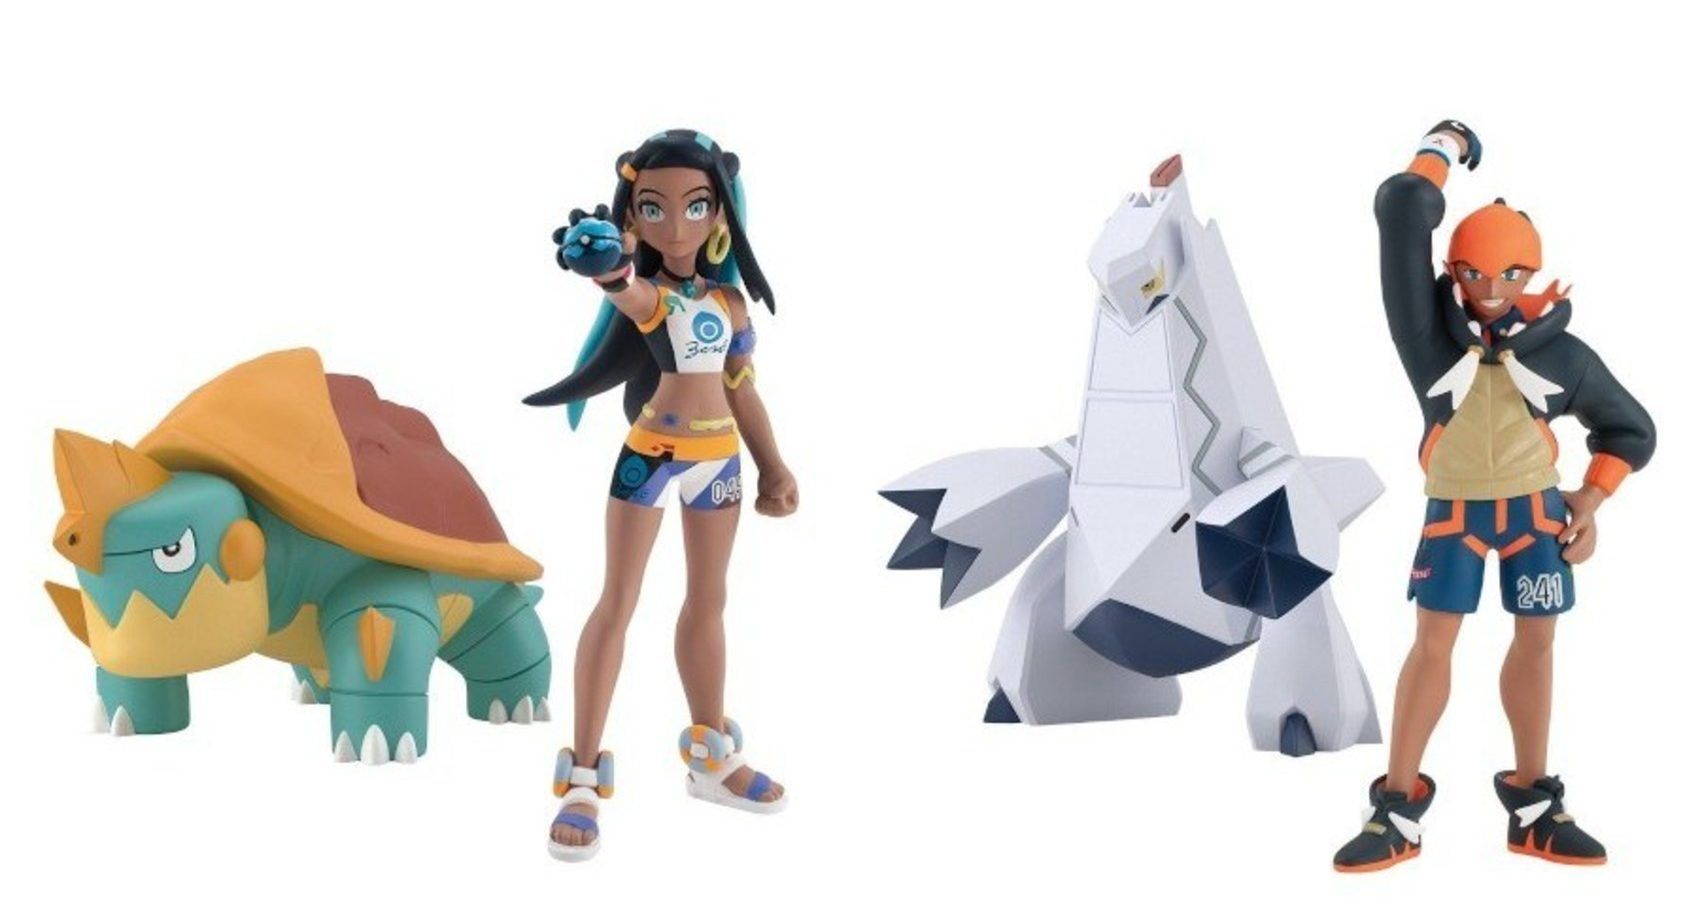 New Pokémon Scale World Galar Figures Are Available Now For PreOrder